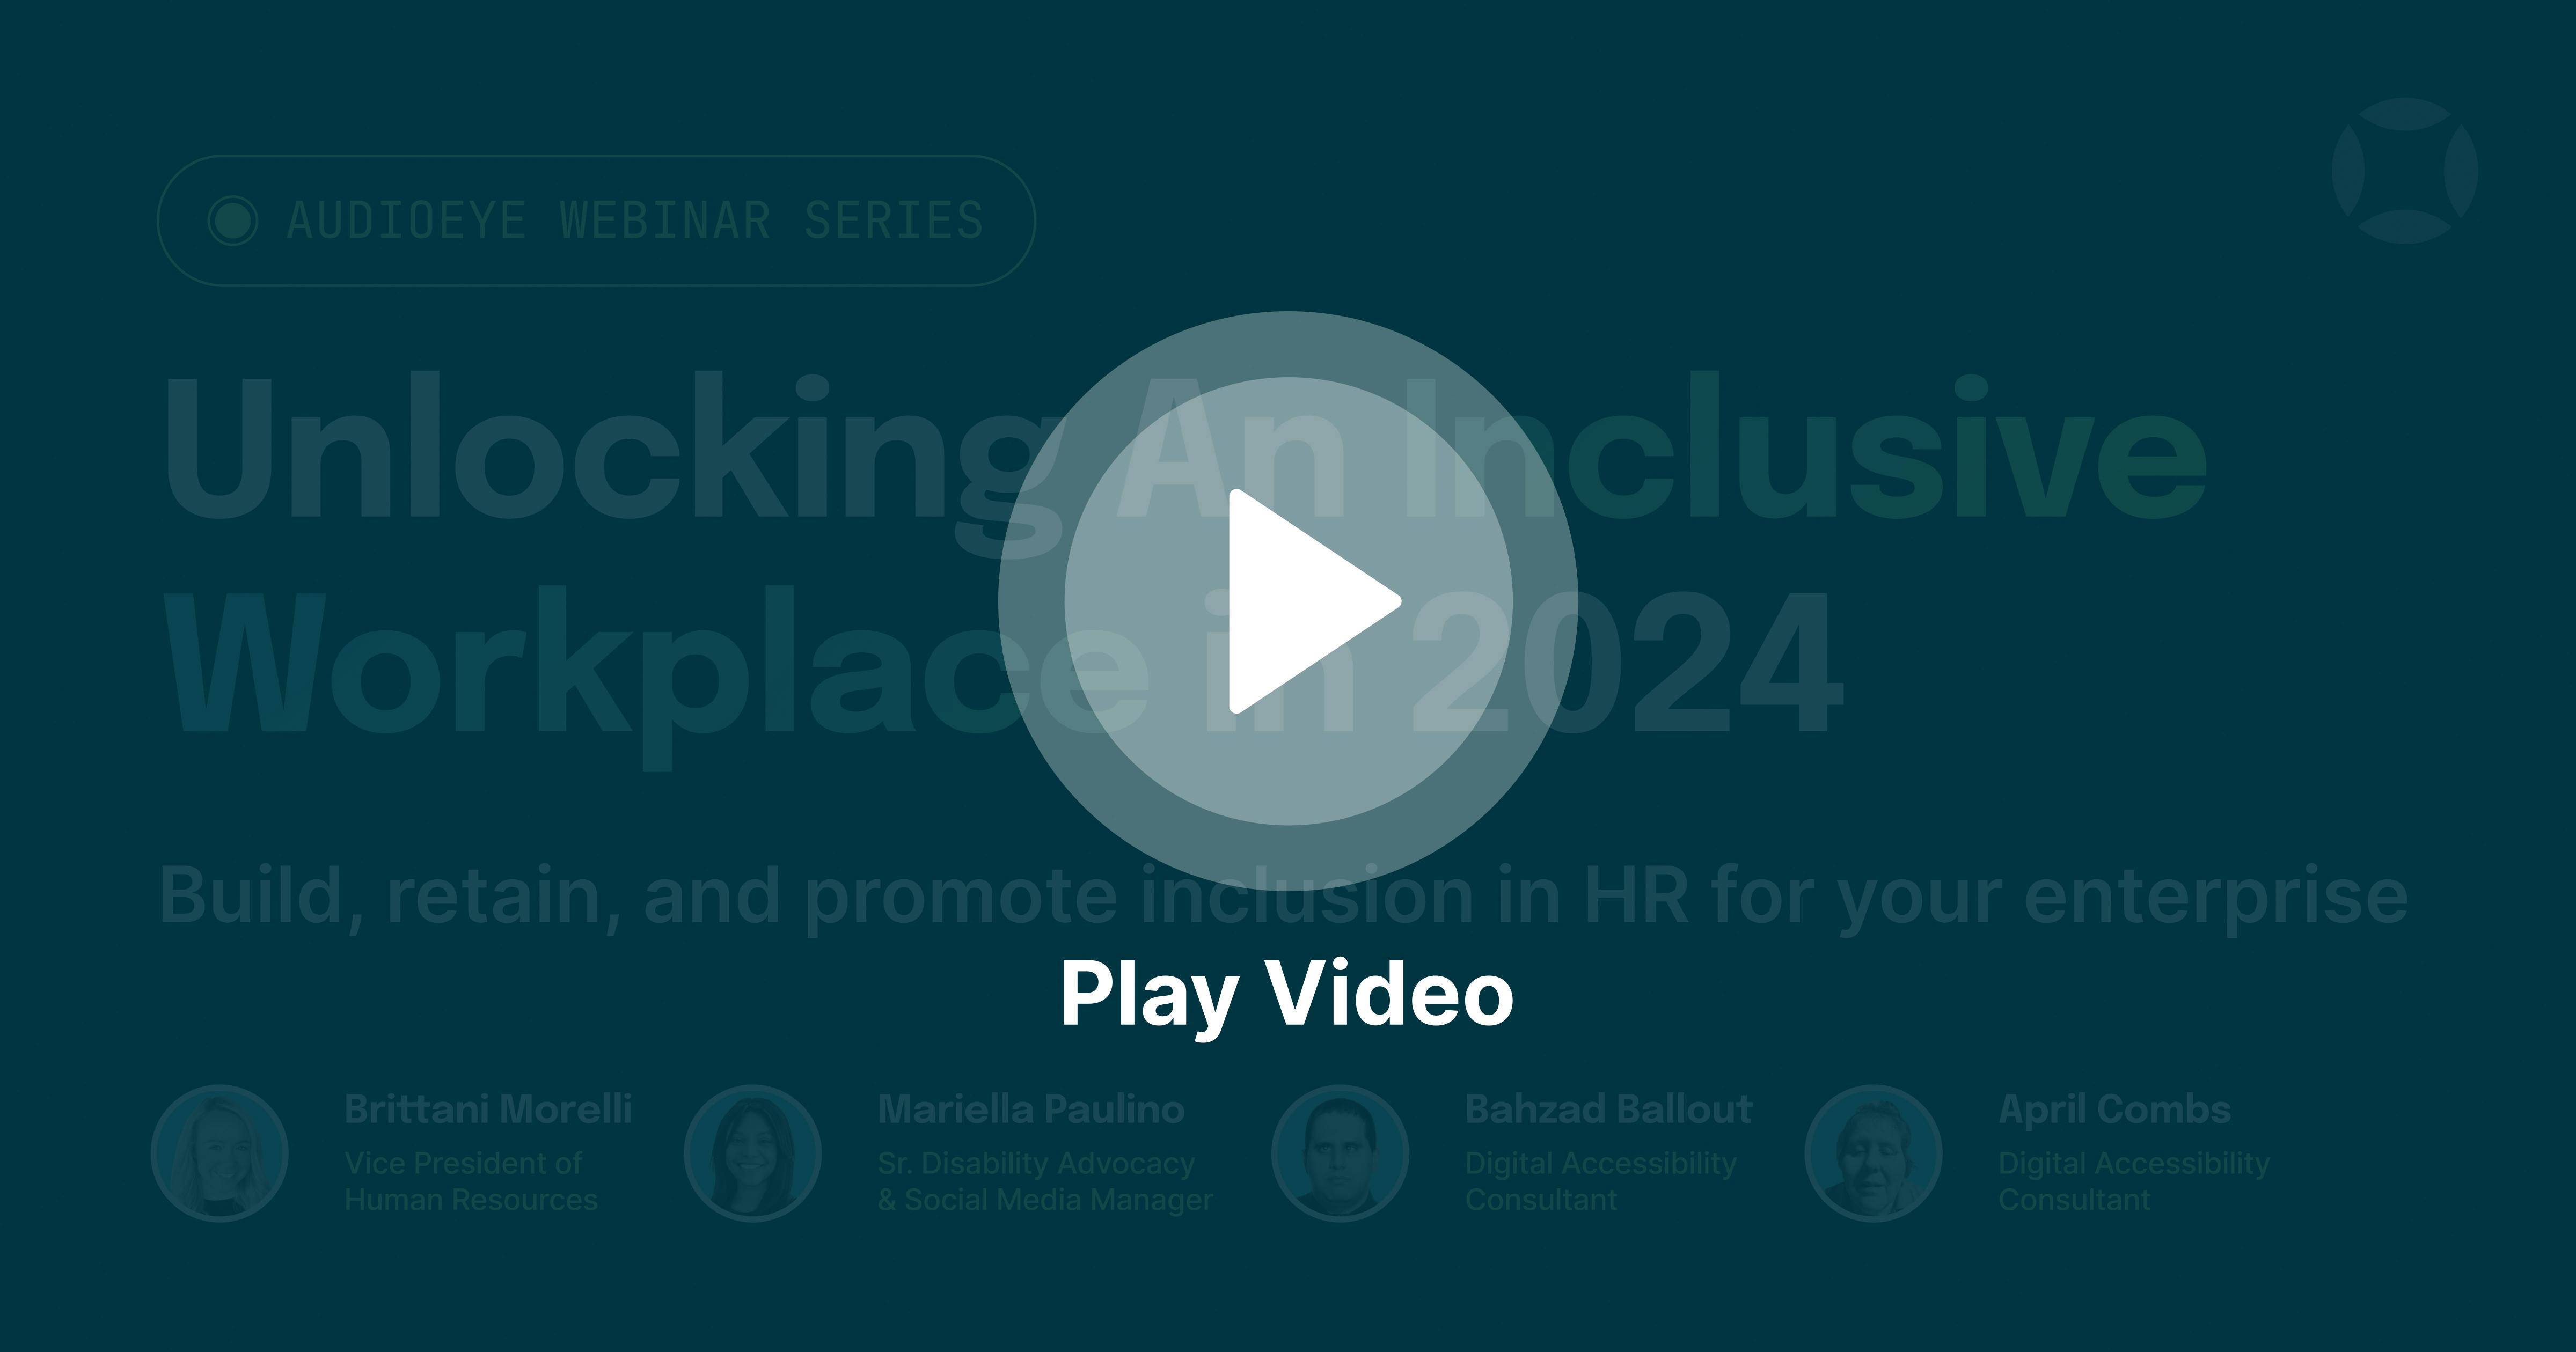 Play Video for the AudioEye Webinar Series: Unlocking an Inclusive Workplace in 2024. Build, retain, and promote inclusion in HR for your enterprise. With Brittani Morelli, Mariella Paulino, Bahzad Ballout, and April Combs.